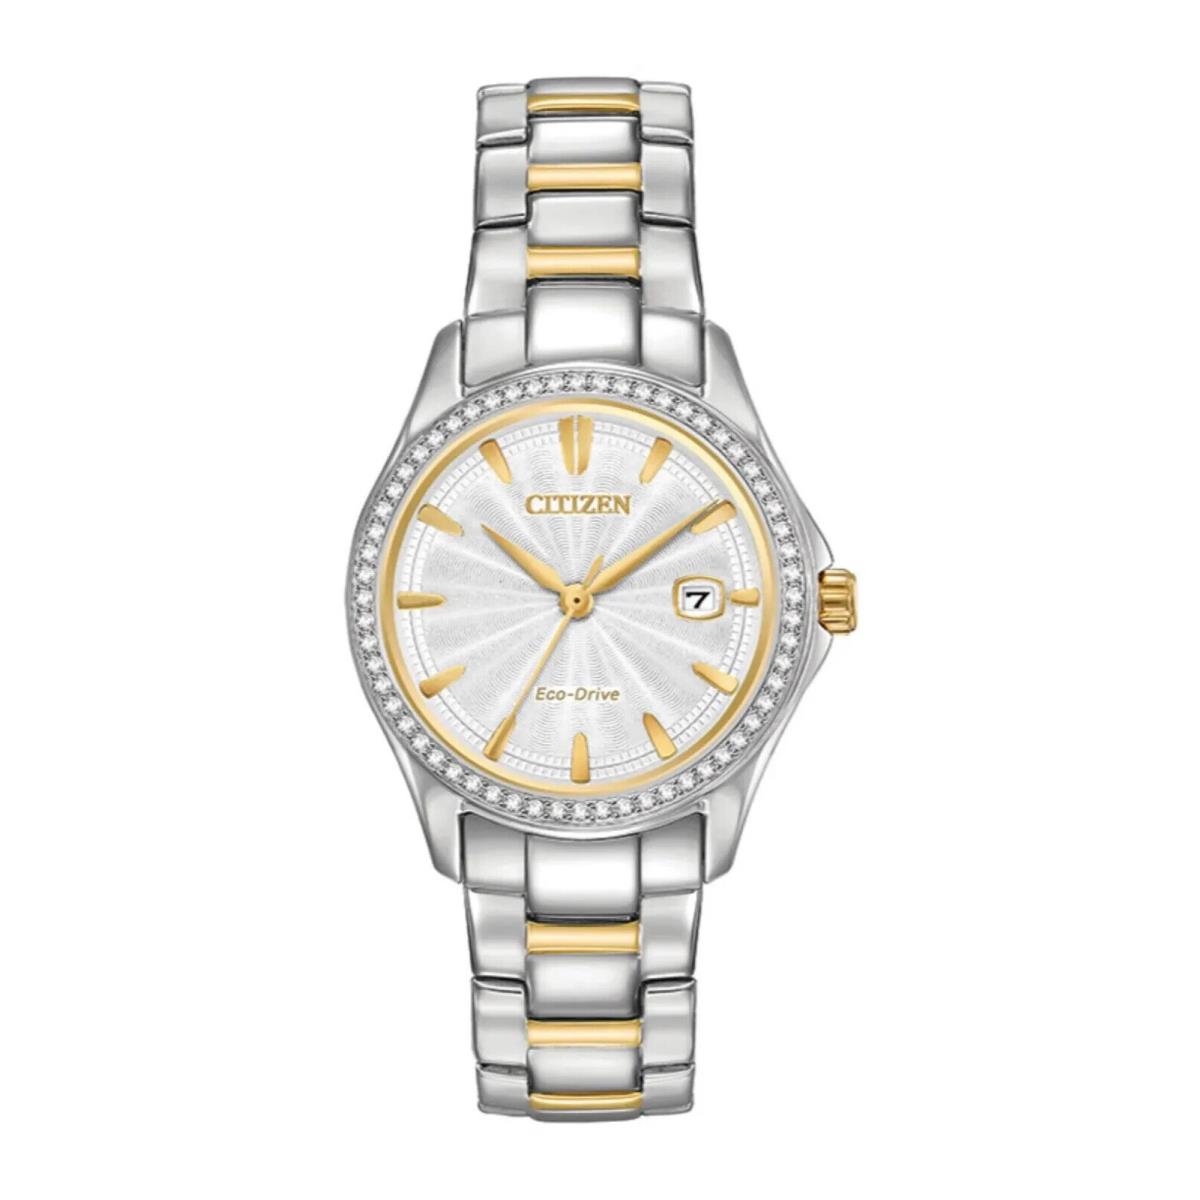 Citizen Women`s Silhouette Crystal Two Tone Watch FE1144-69A - Multicolor Band